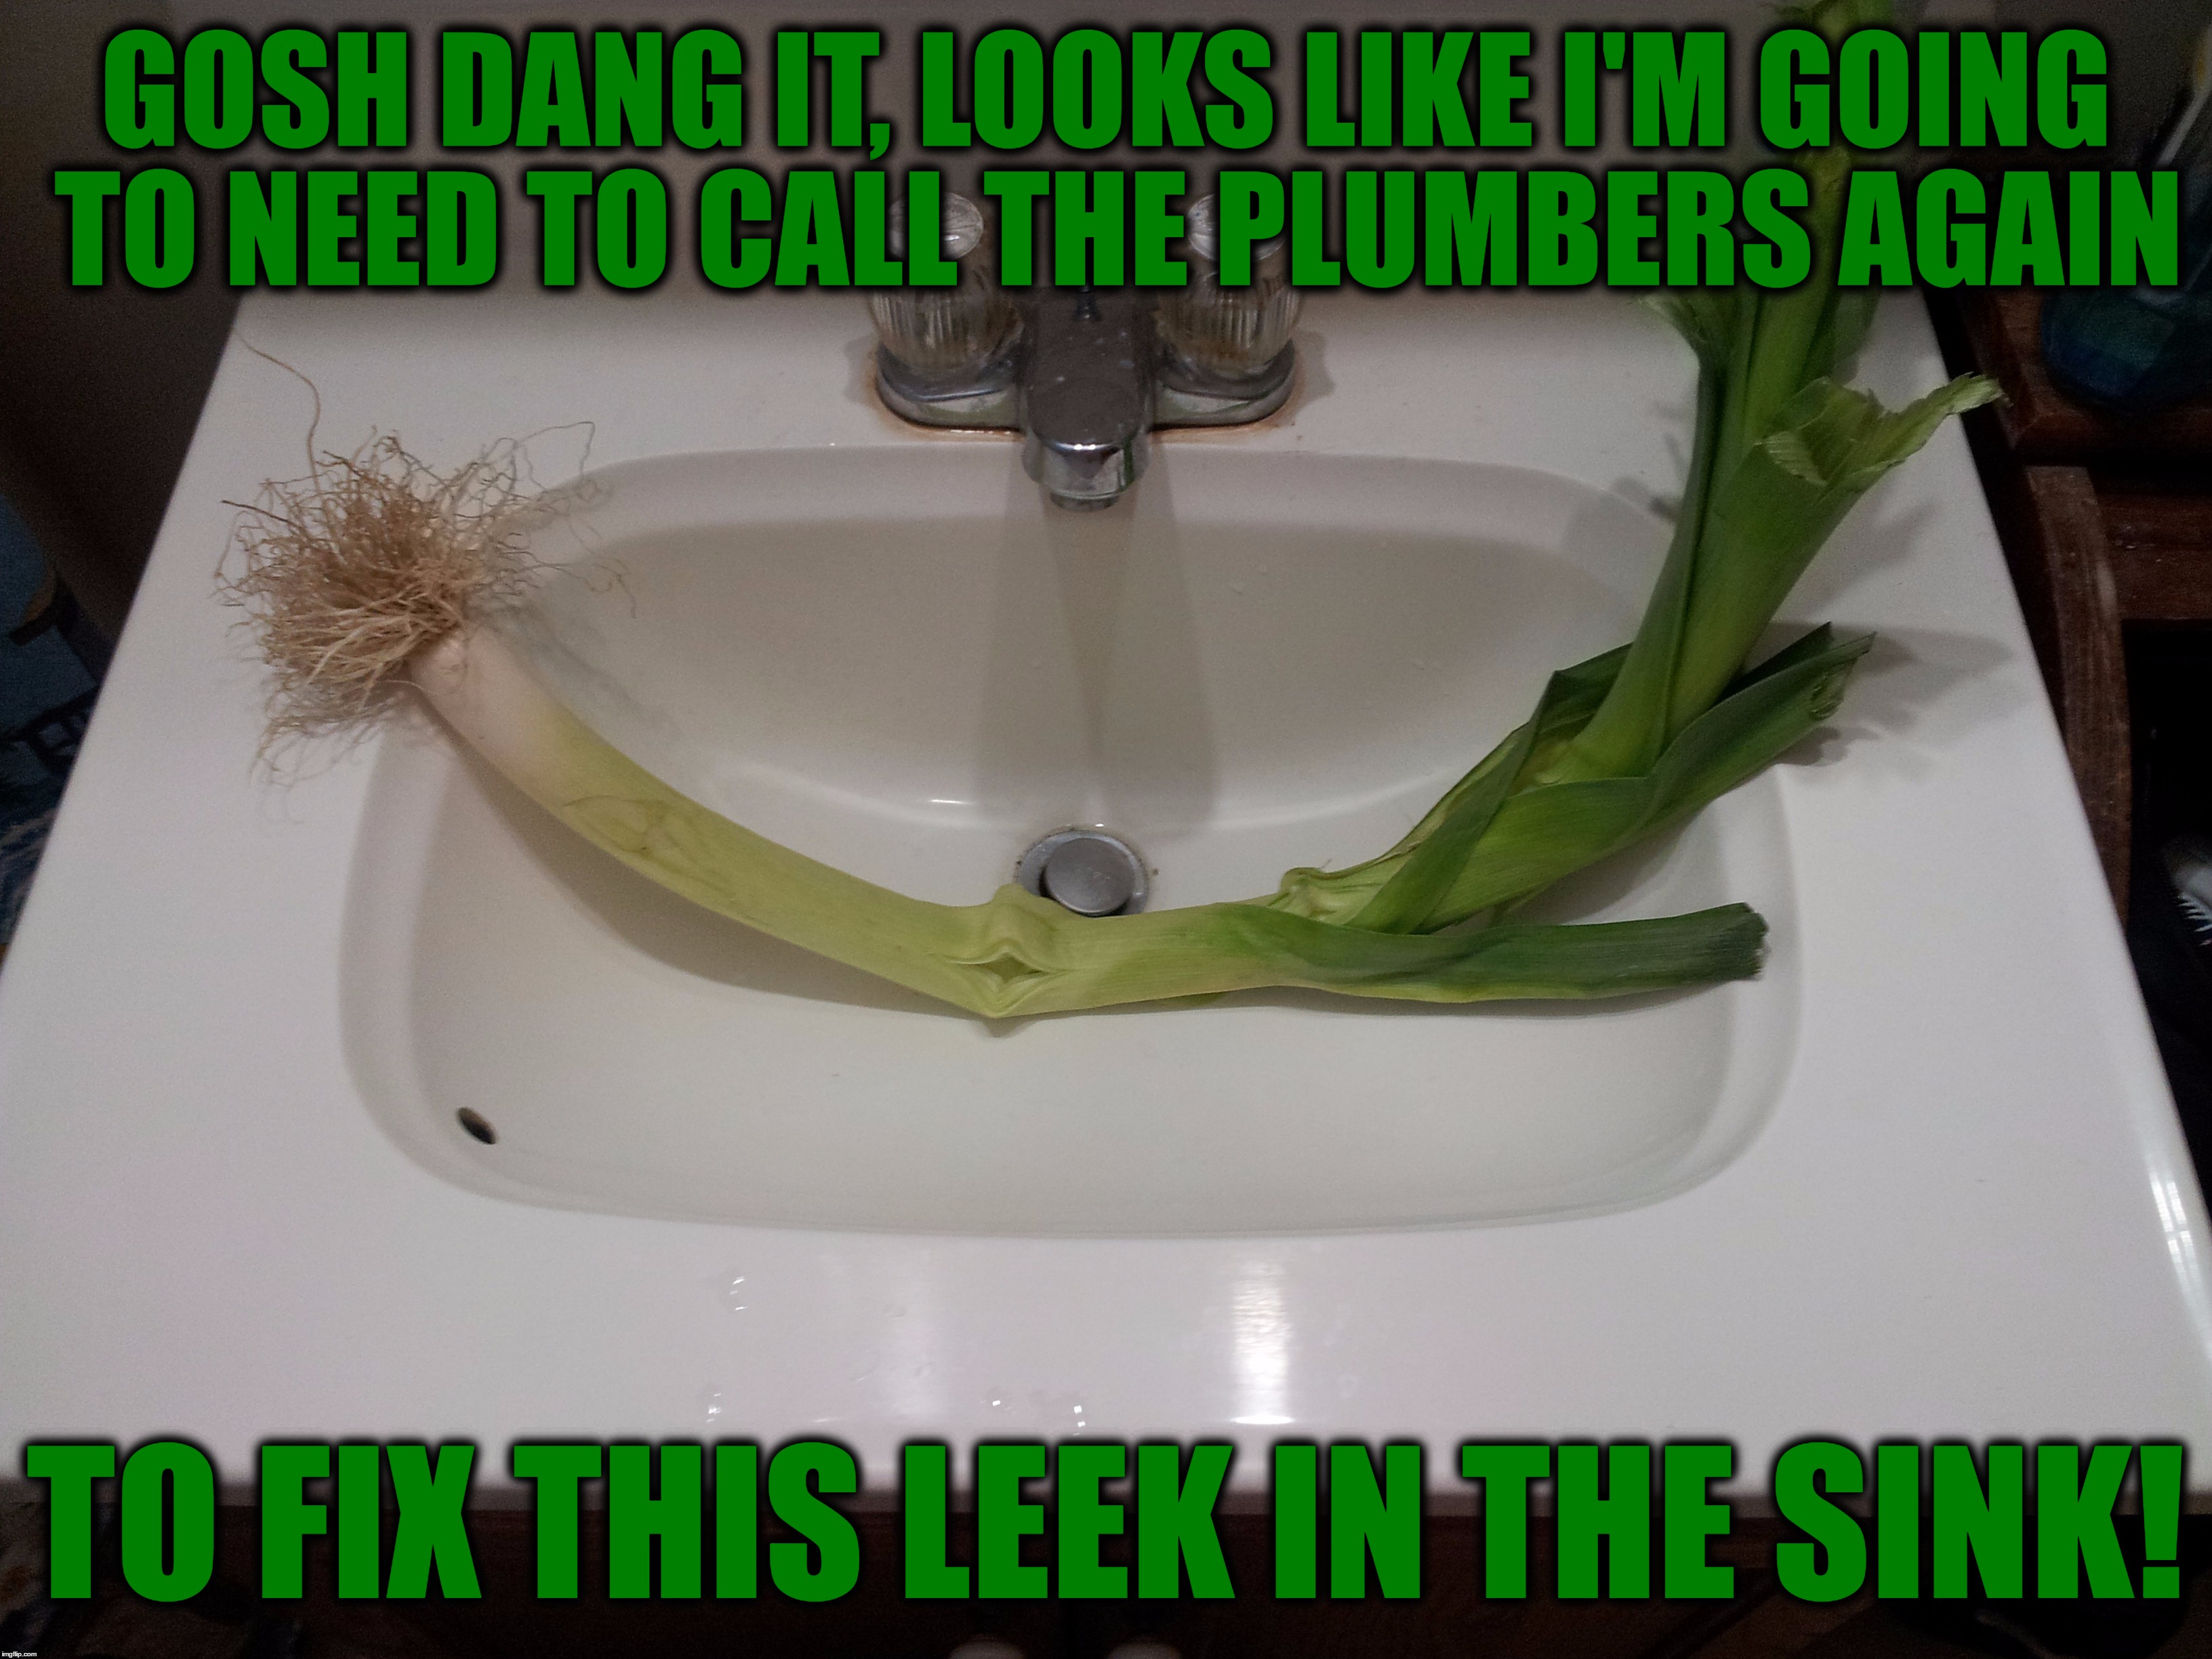 I'd Like To Thank hokeewolf For The Idea | GOSH DANG IT, LOOKS LIKE I'M GOING TO NEED TO CALL THE PLUMBERS AGAIN; TO FIX THIS LEEK IN THE SINK! | image tagged in memes,funny,leek,plumber problems,sink,bathroom | made w/ Imgflip meme maker